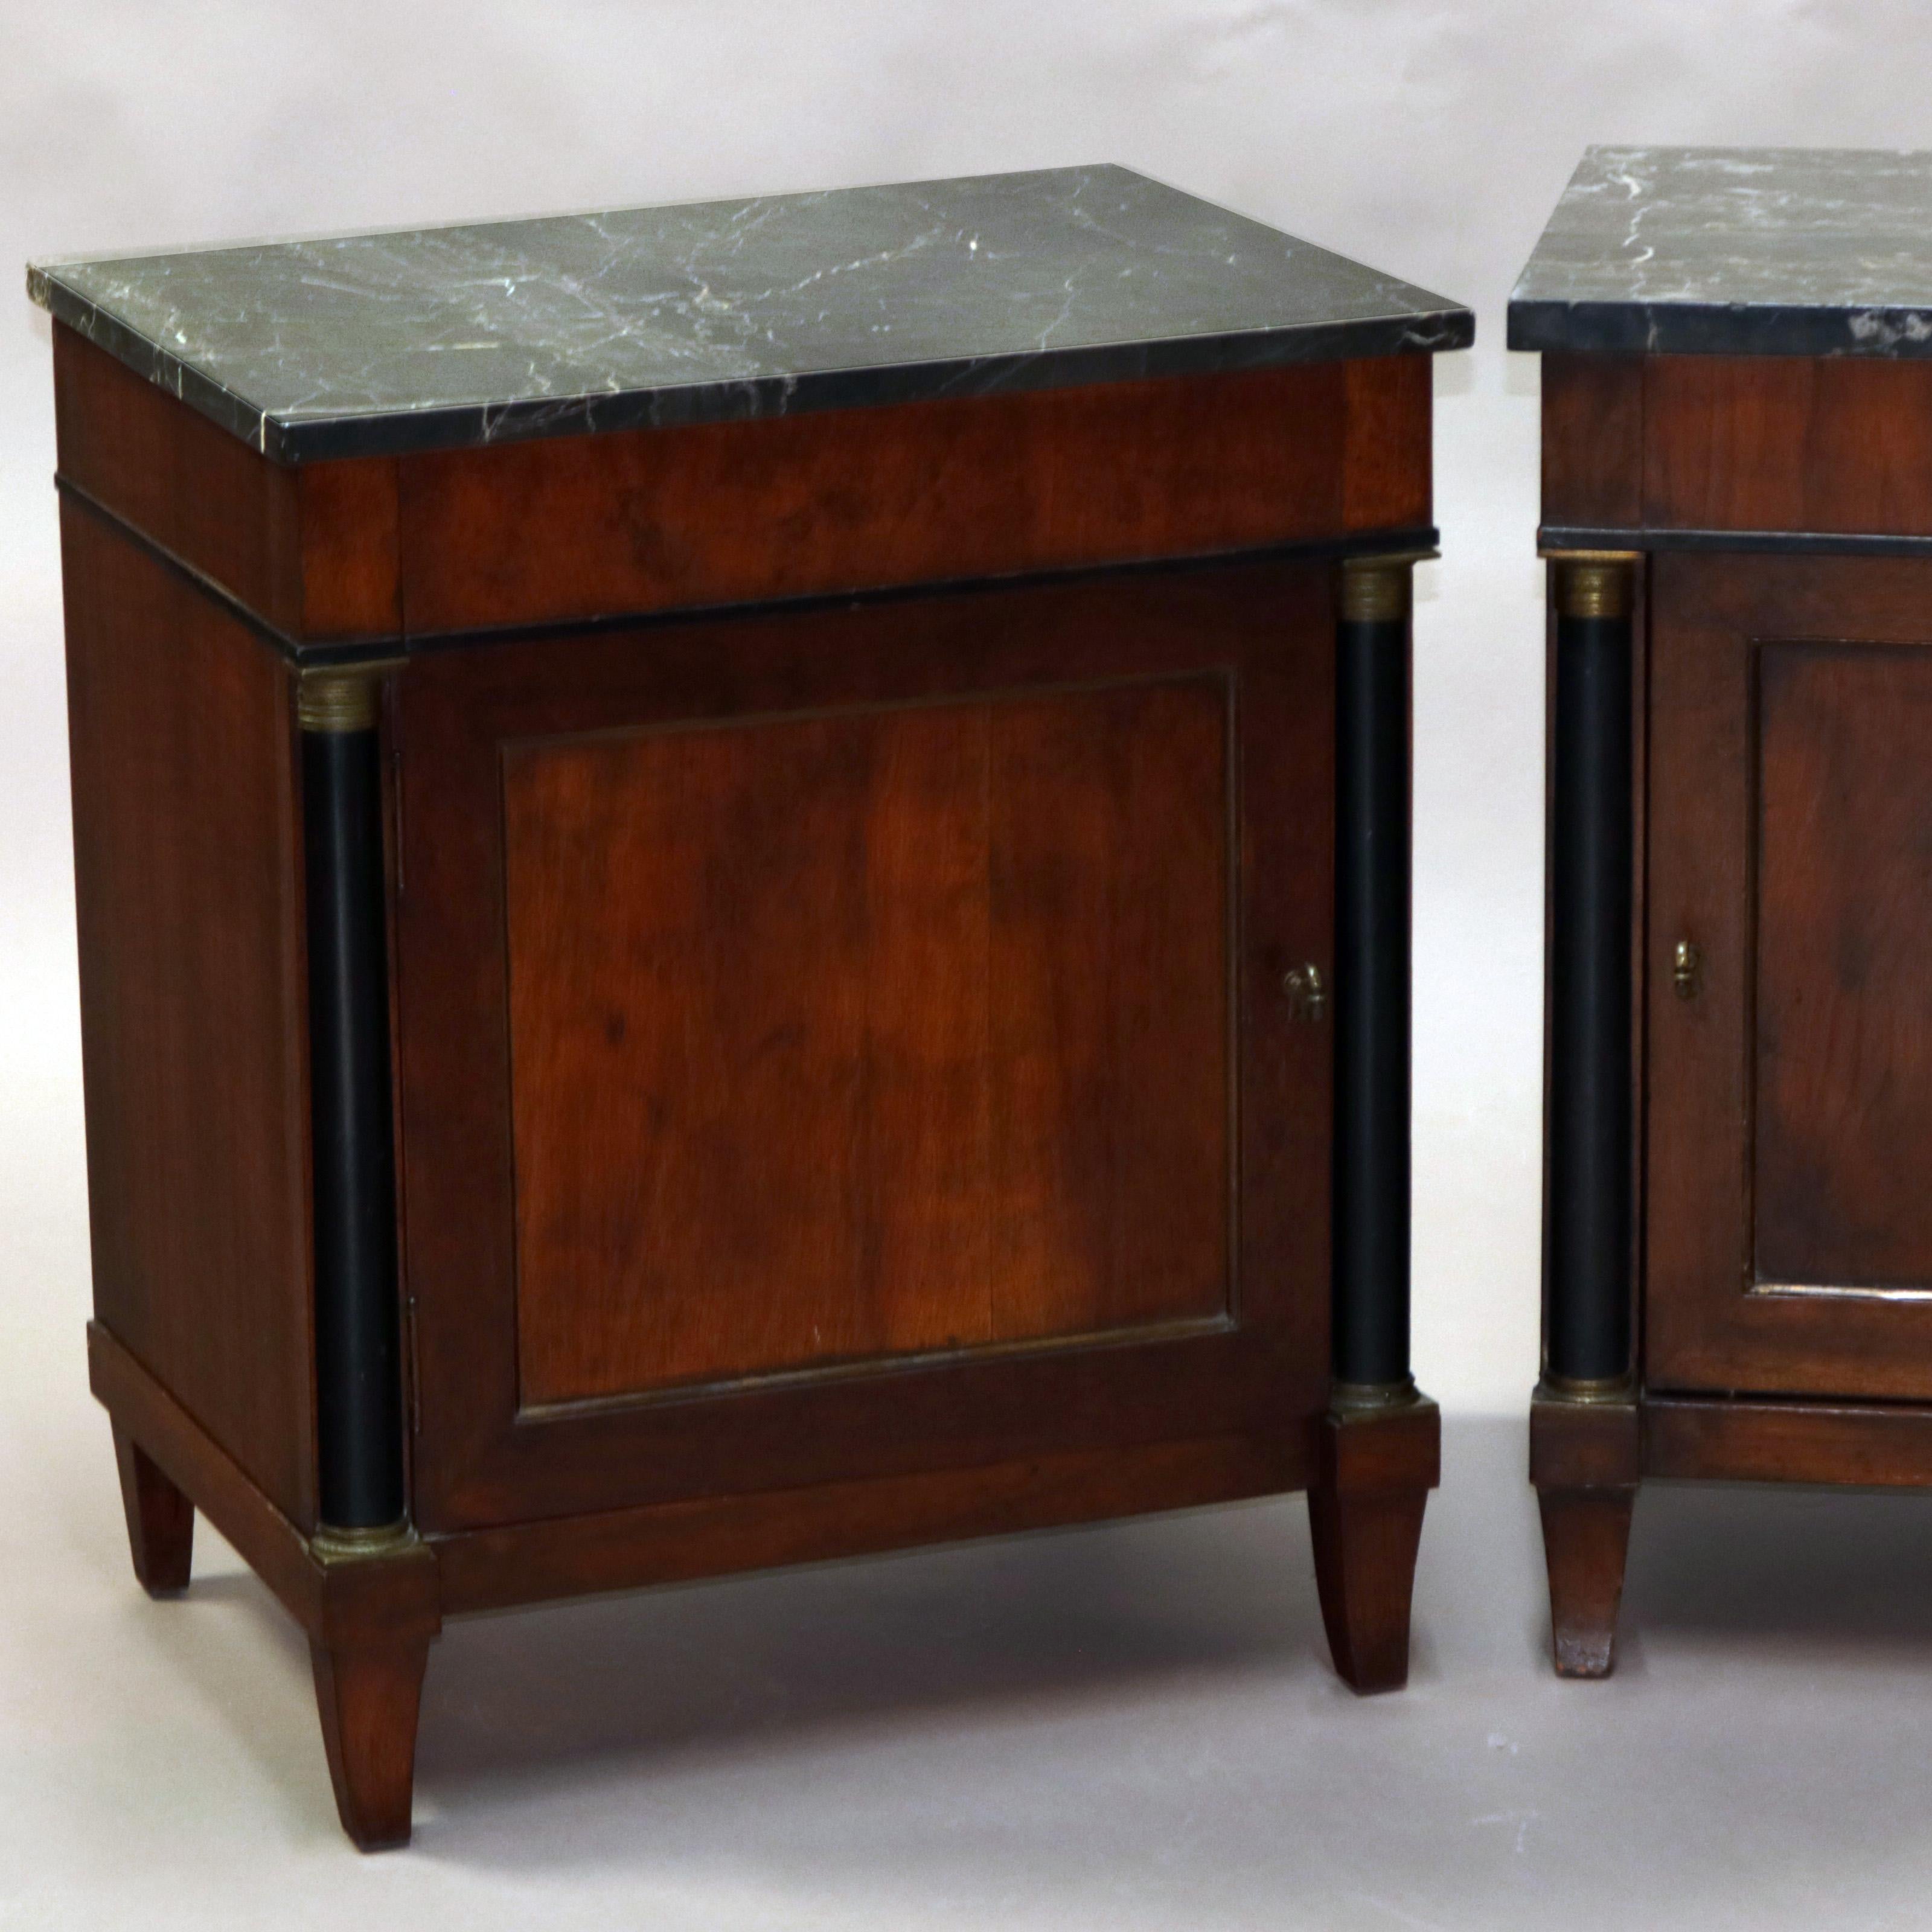 An antique pair of French Empire side table offer mahogany construction each with a marble top surmounting single door cabinet flanked by ebonized turned columns with bronze mounts, raised on square tapered legs, circa 1890

Measures- 26.75